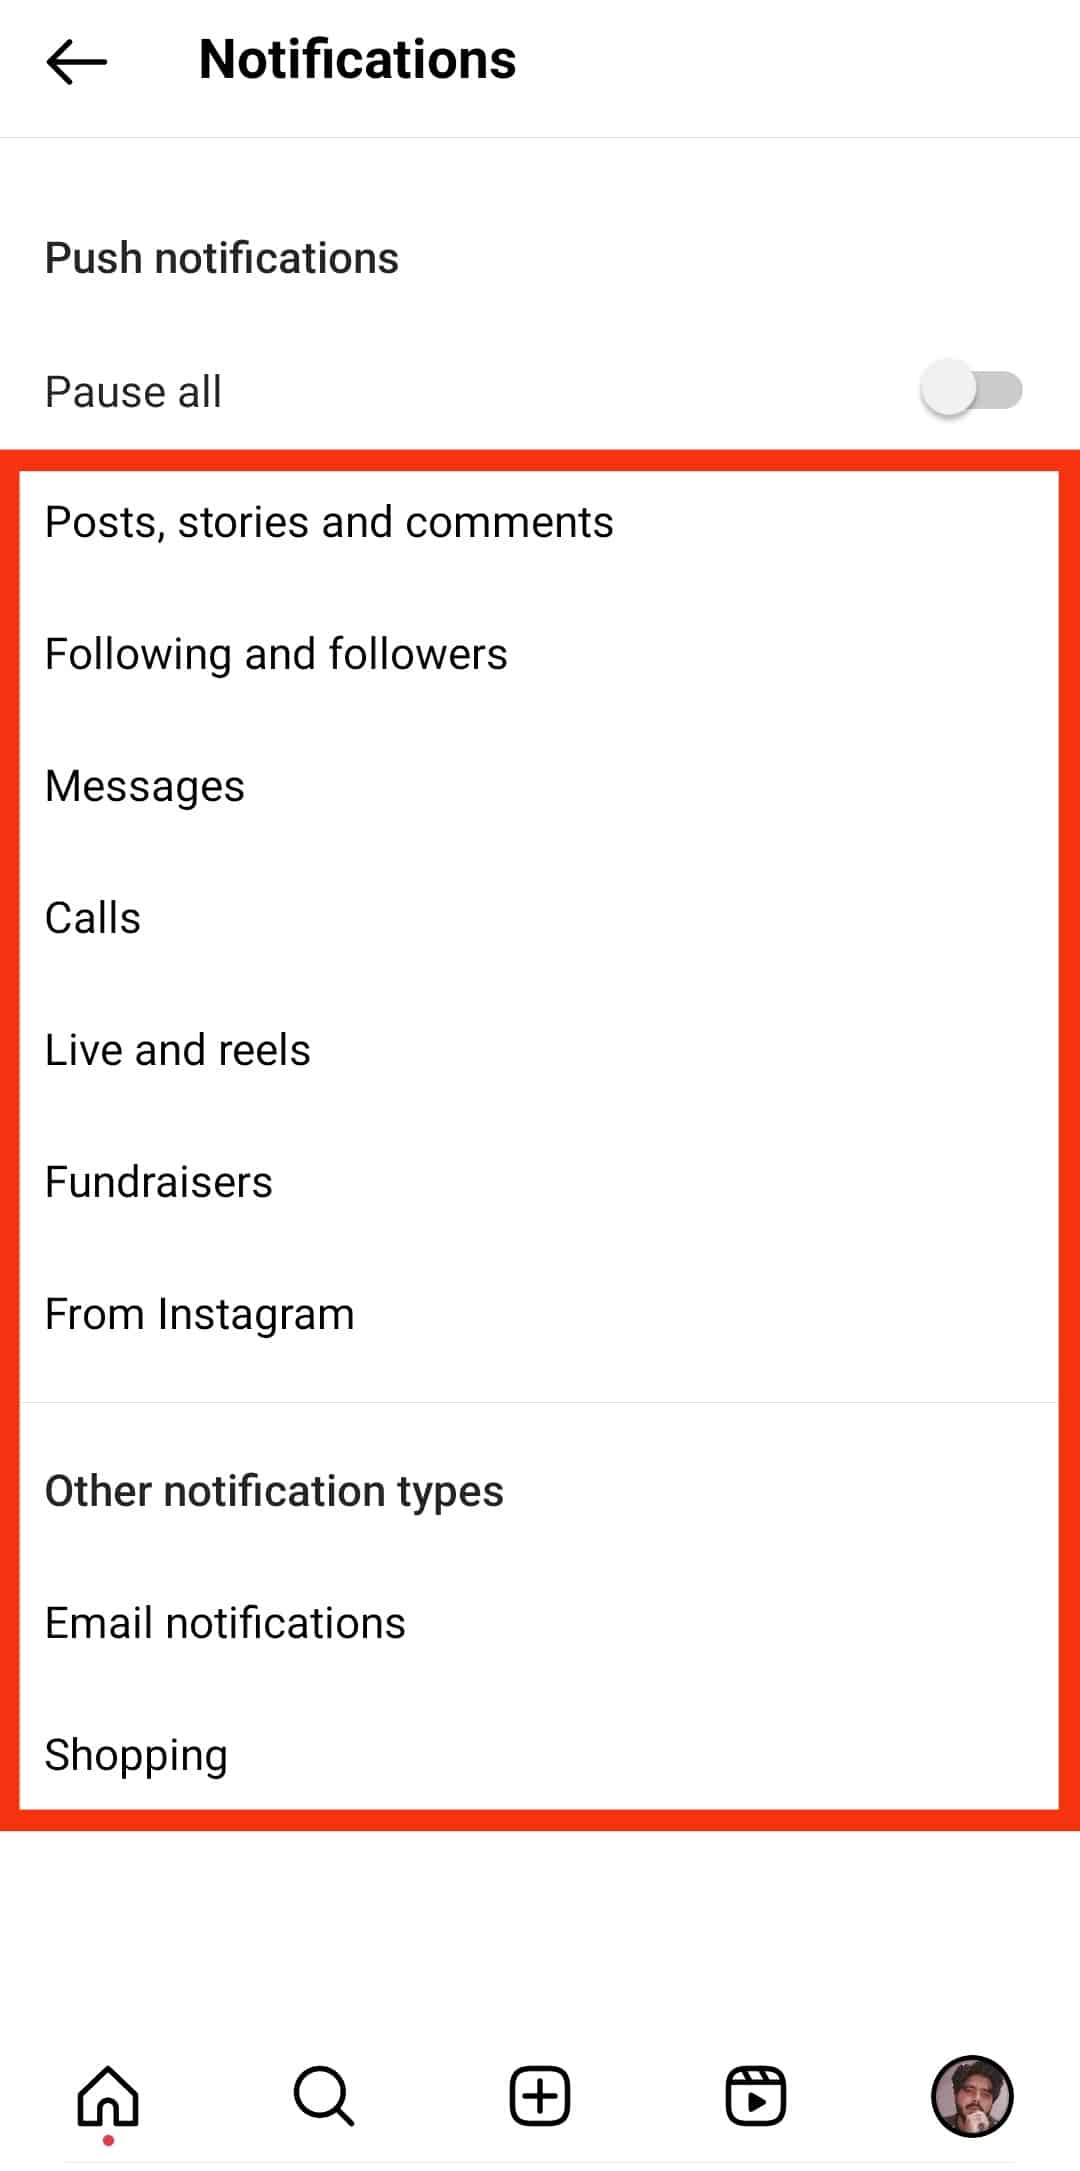 Navigate To Specific Notifications And Turn Those Off